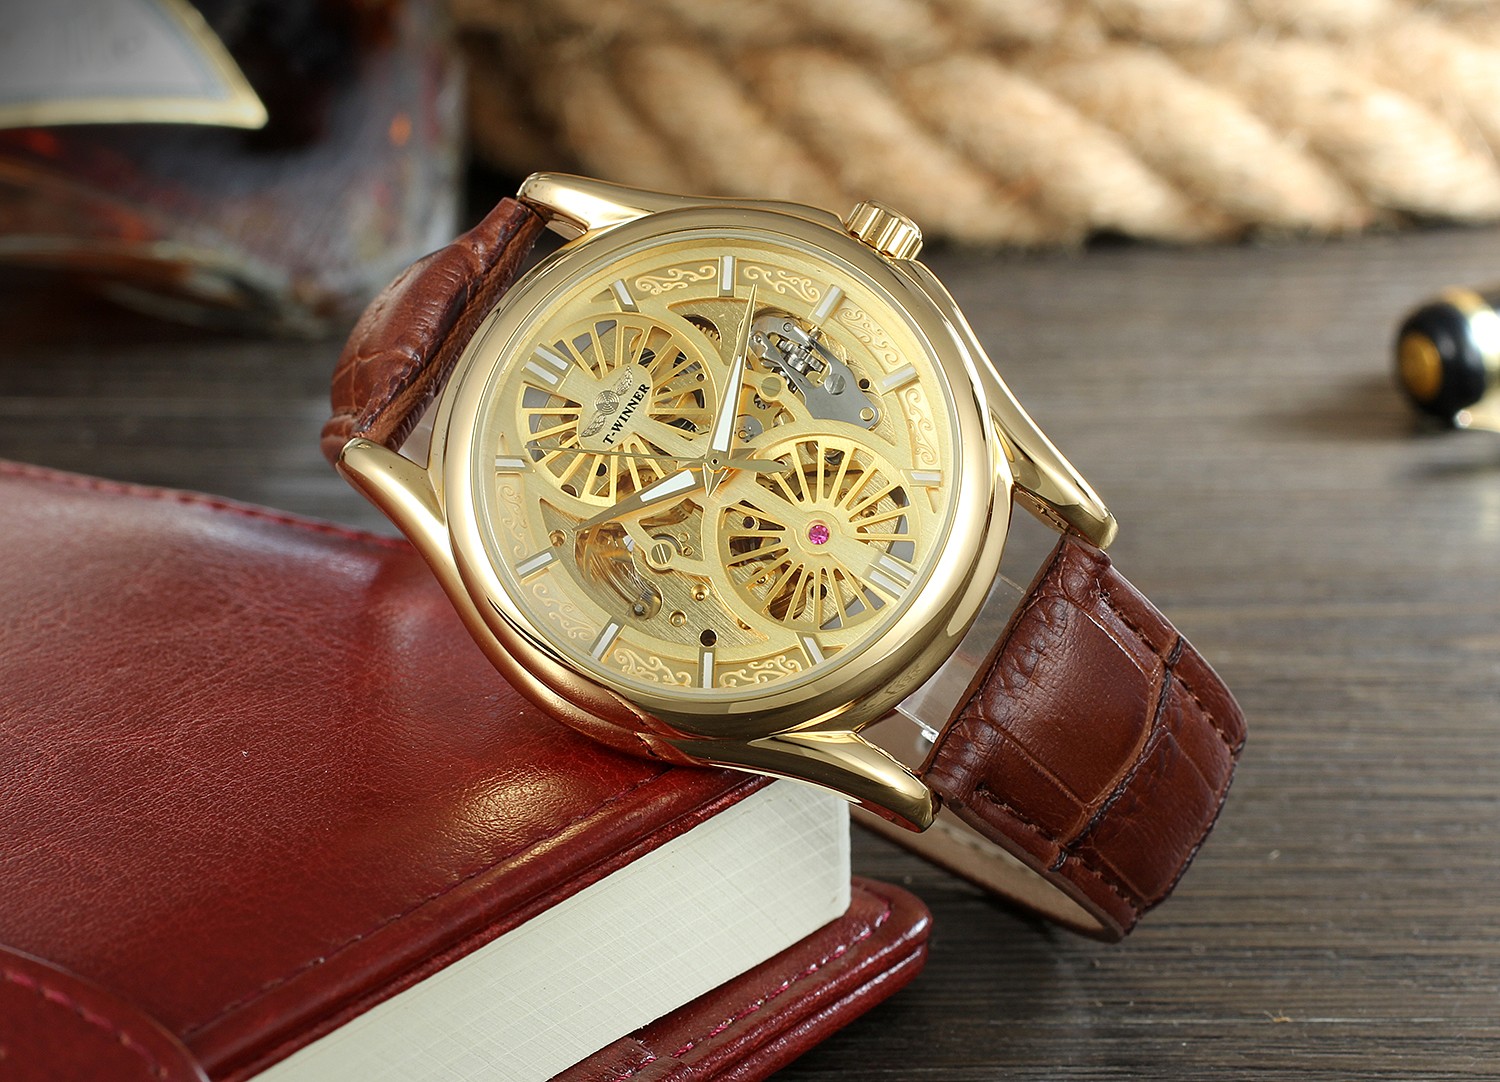 A3-Genuine-Leather-Strap-Automatic-Mechanical-Watch-Fashionable-Transparent-Case-Men-Watch-1244943